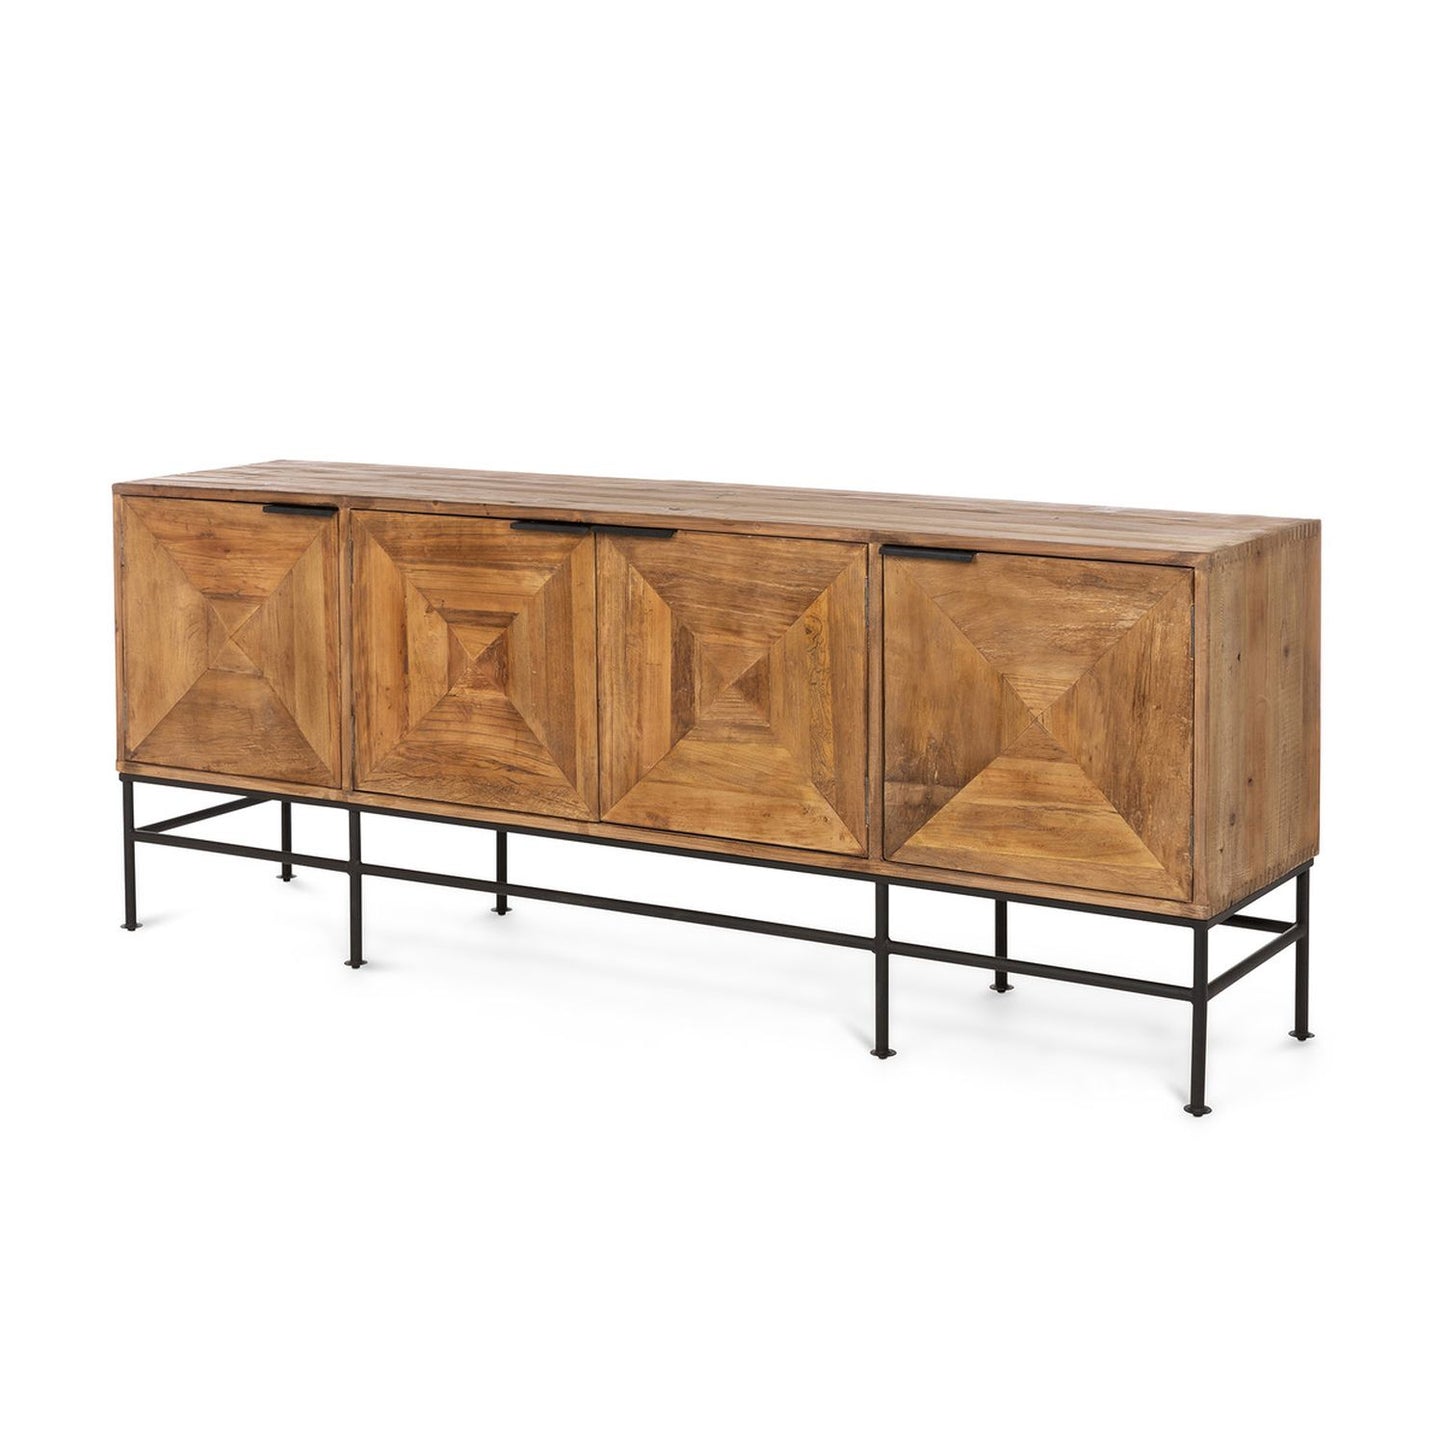 Park Hill Collection Lodge Bryce Entertainment Console